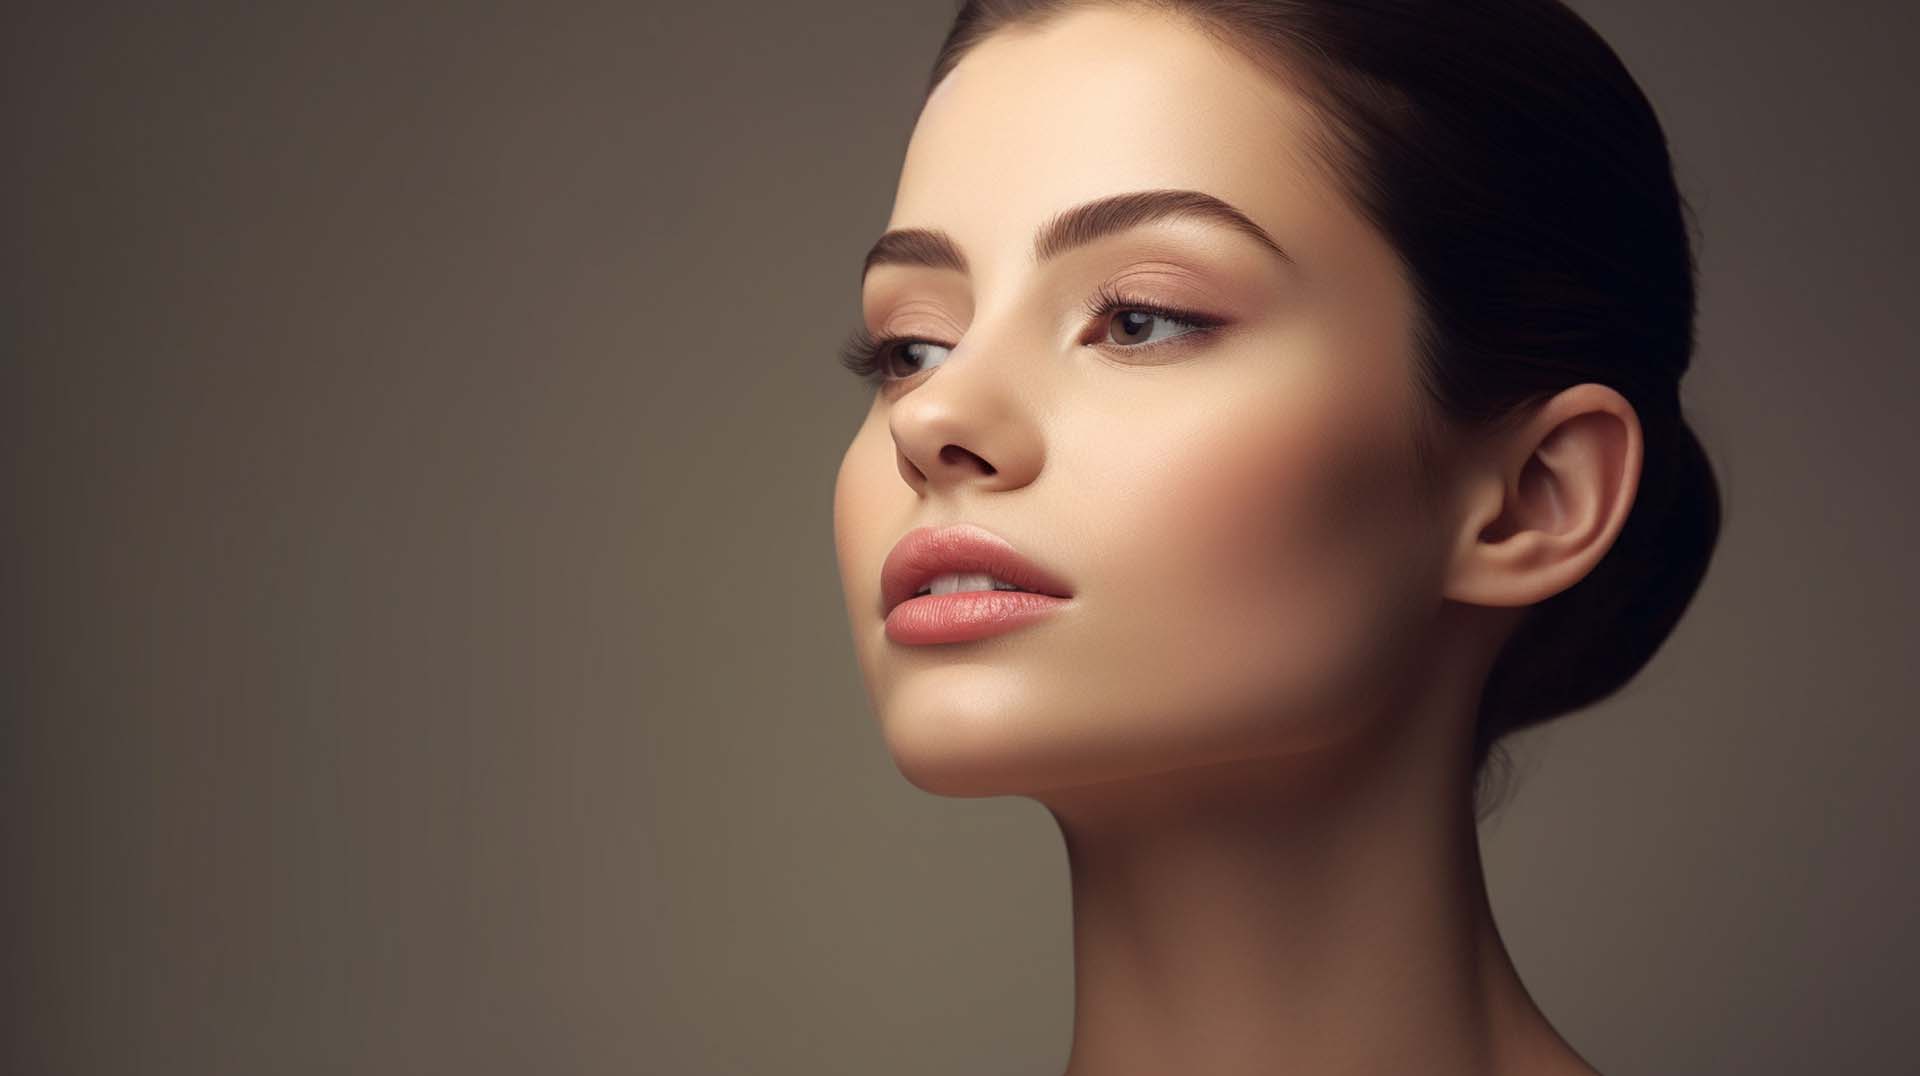 Neck Lift Surgery near me in Brant, Ontario